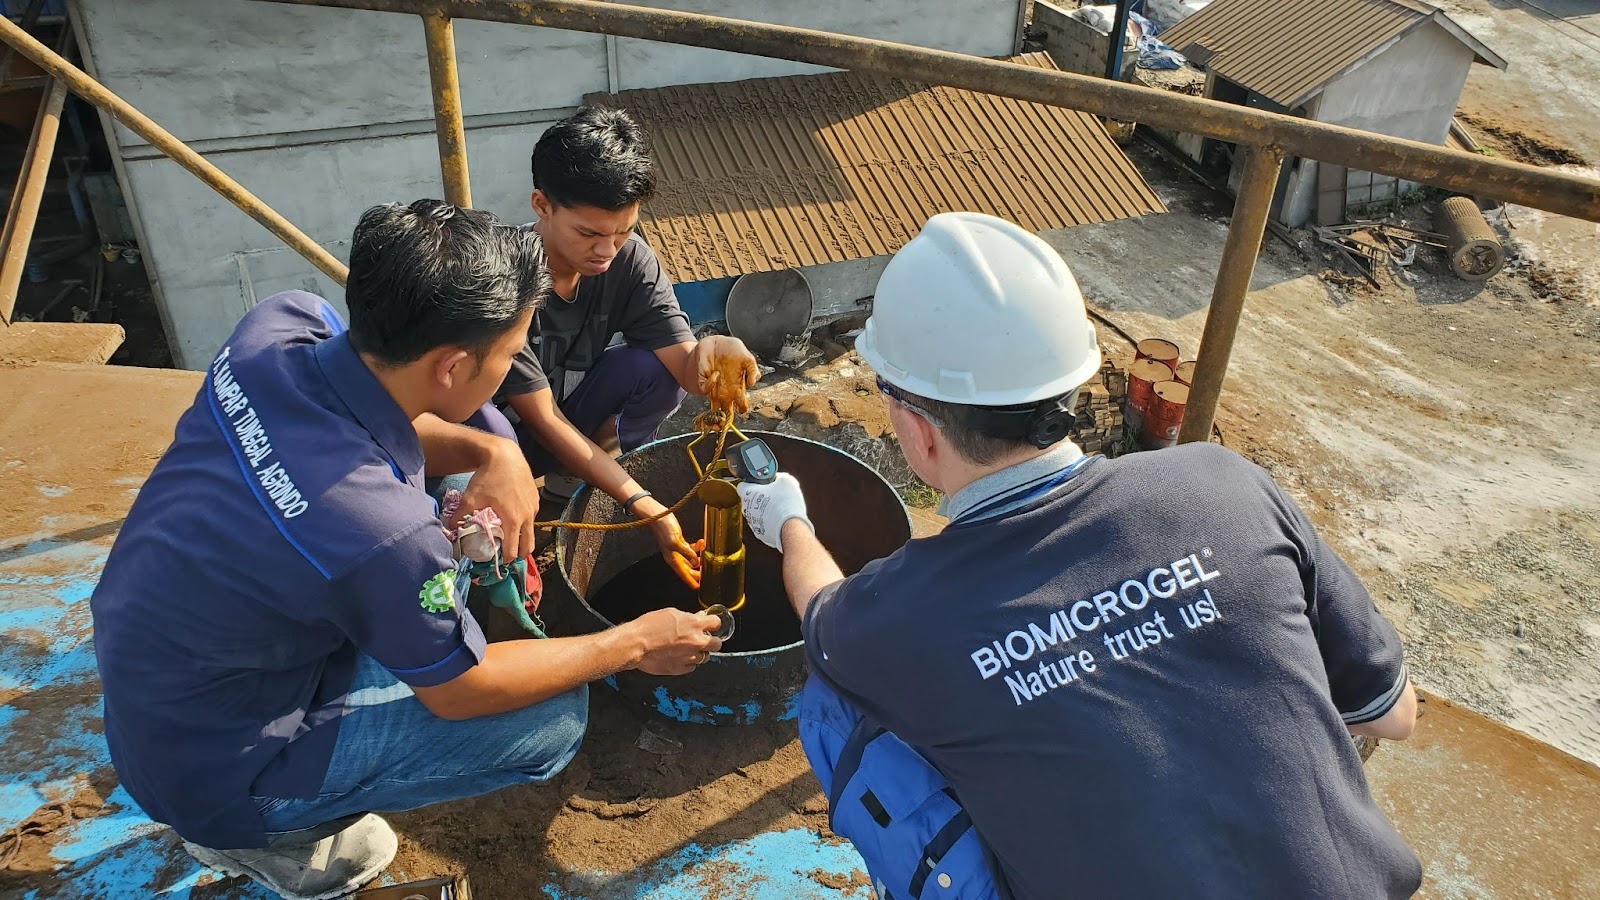 Biomicrogel specialists conduct measurements in an oil extraction factoty